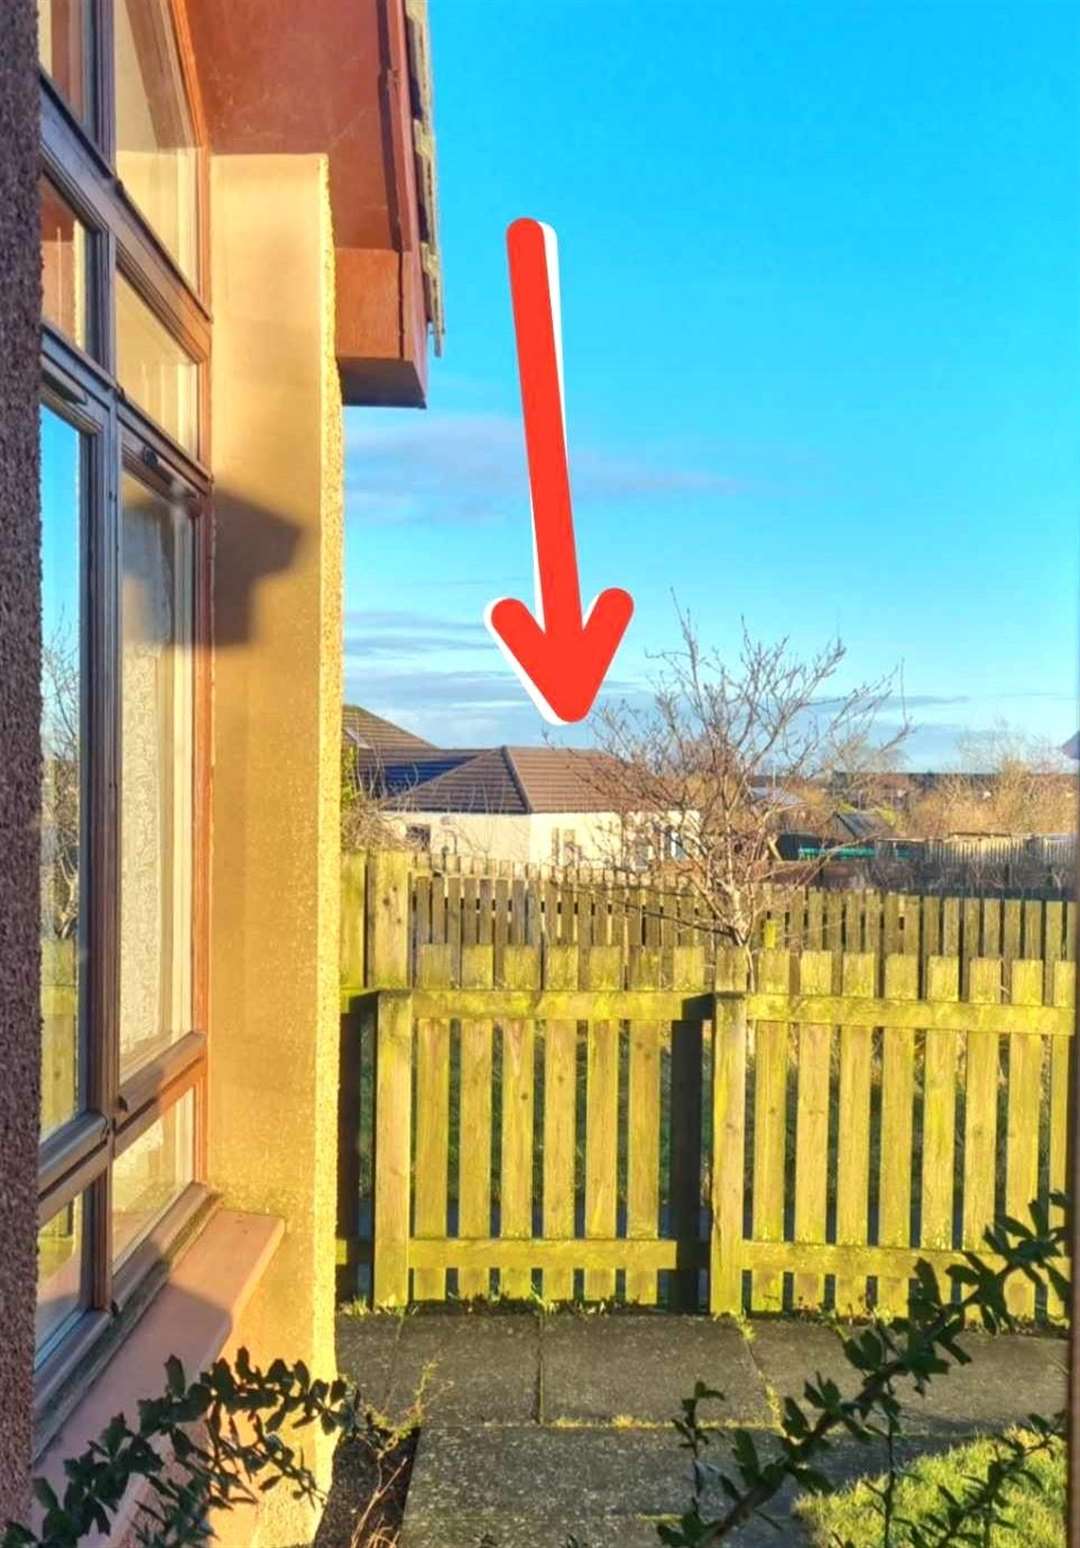 Mrs Jones feels frustrated that she can see Thor House from the windows of her new home and supplied the photograph with arrow to show how close it is.